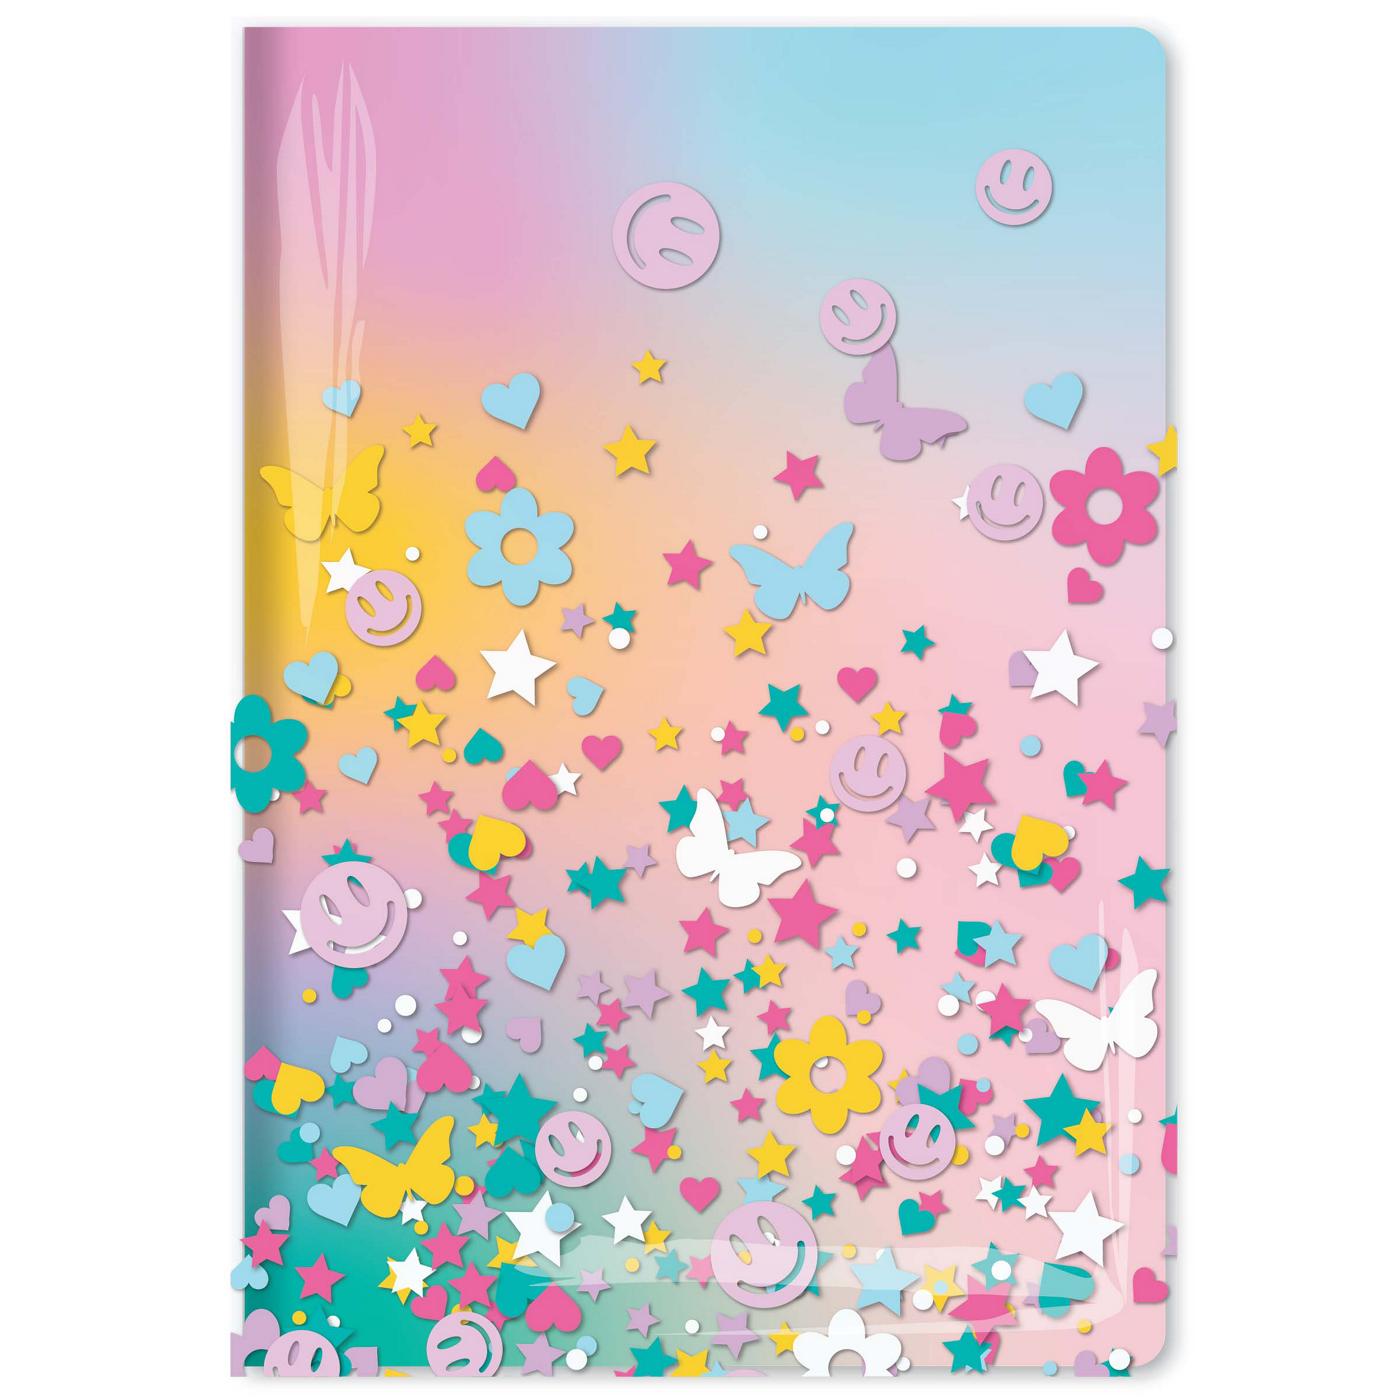 C.R. Gibson Sprinkles Poly Lined Journal; image 1 of 3